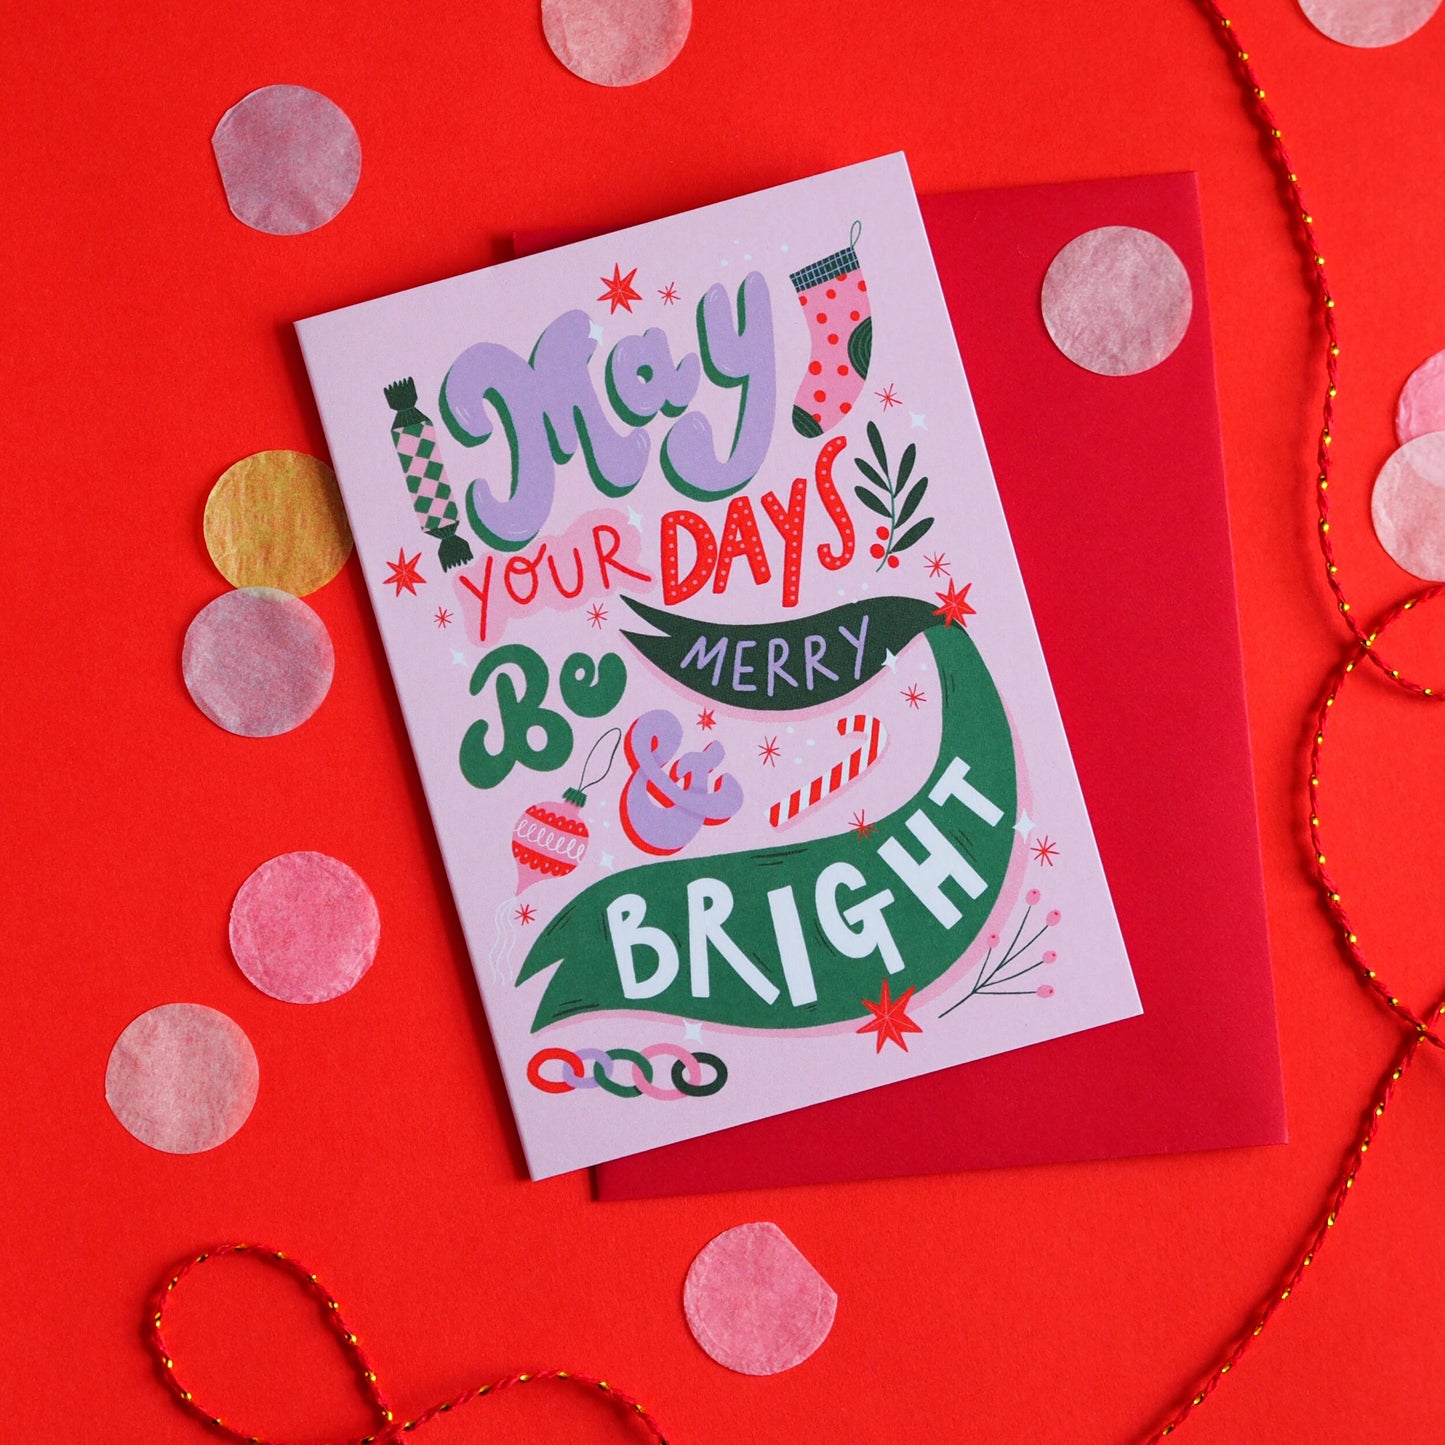 Merry and Bright, Christmas Greetings Card